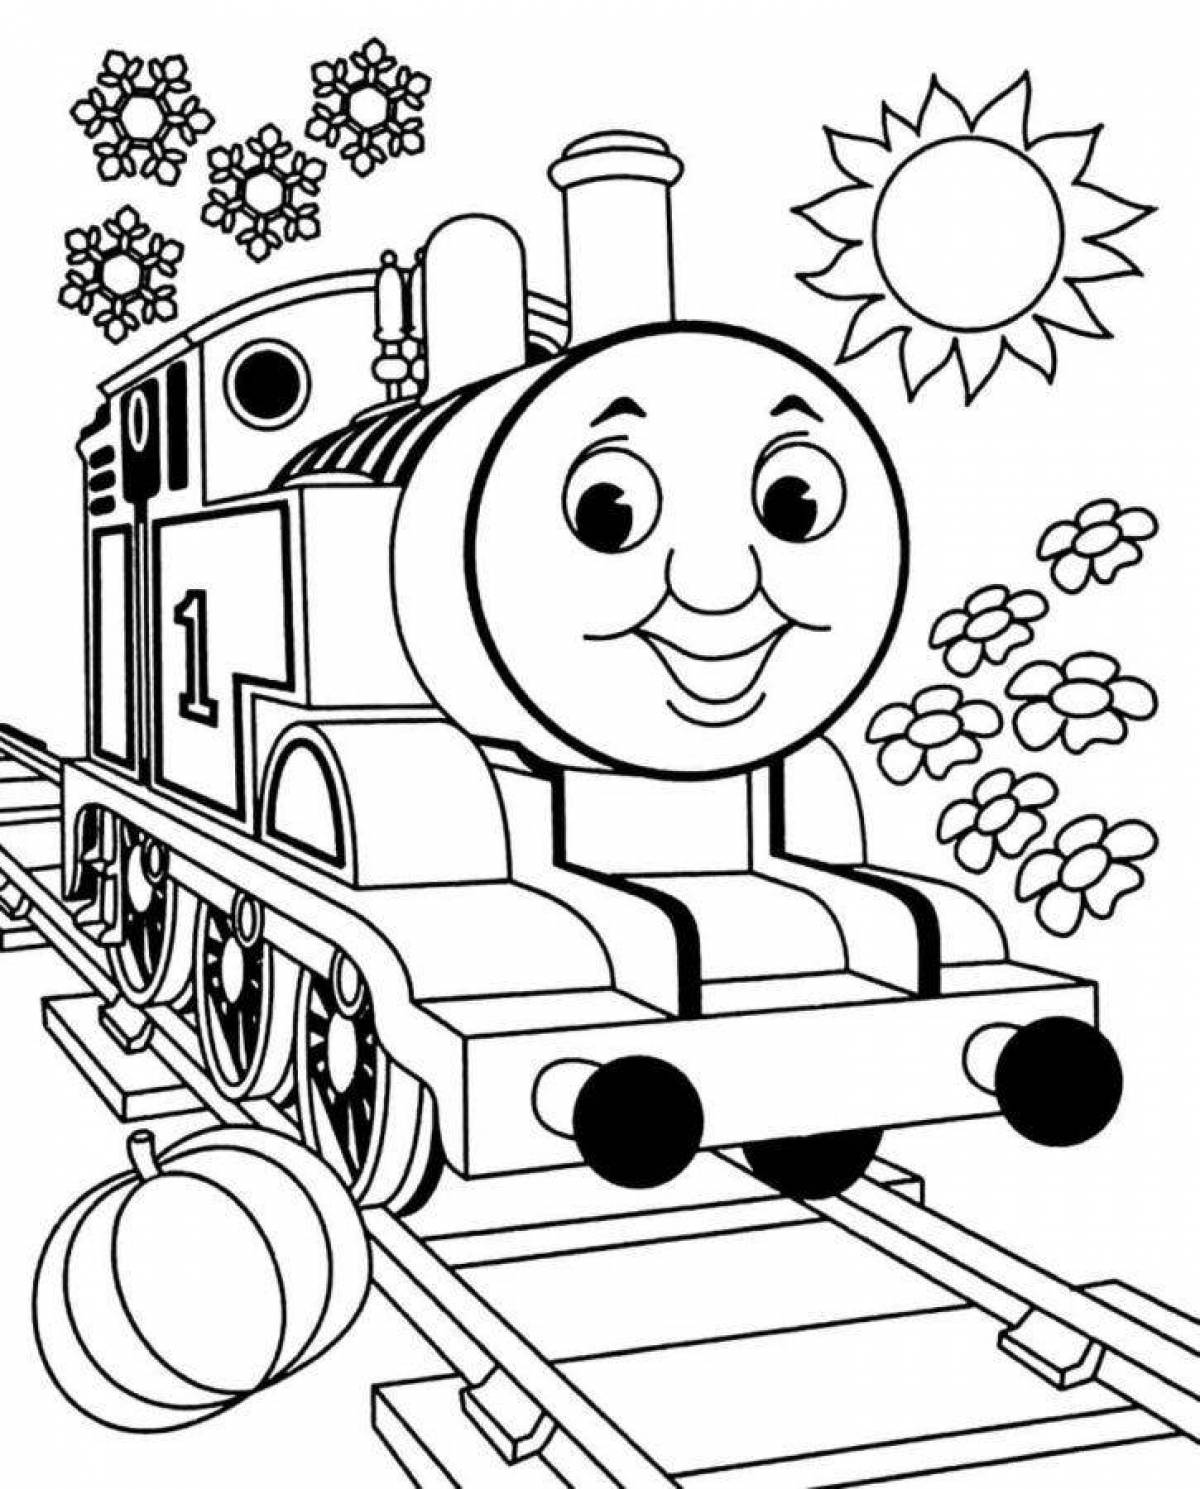 Thomas the Tank Engine for Kids #1